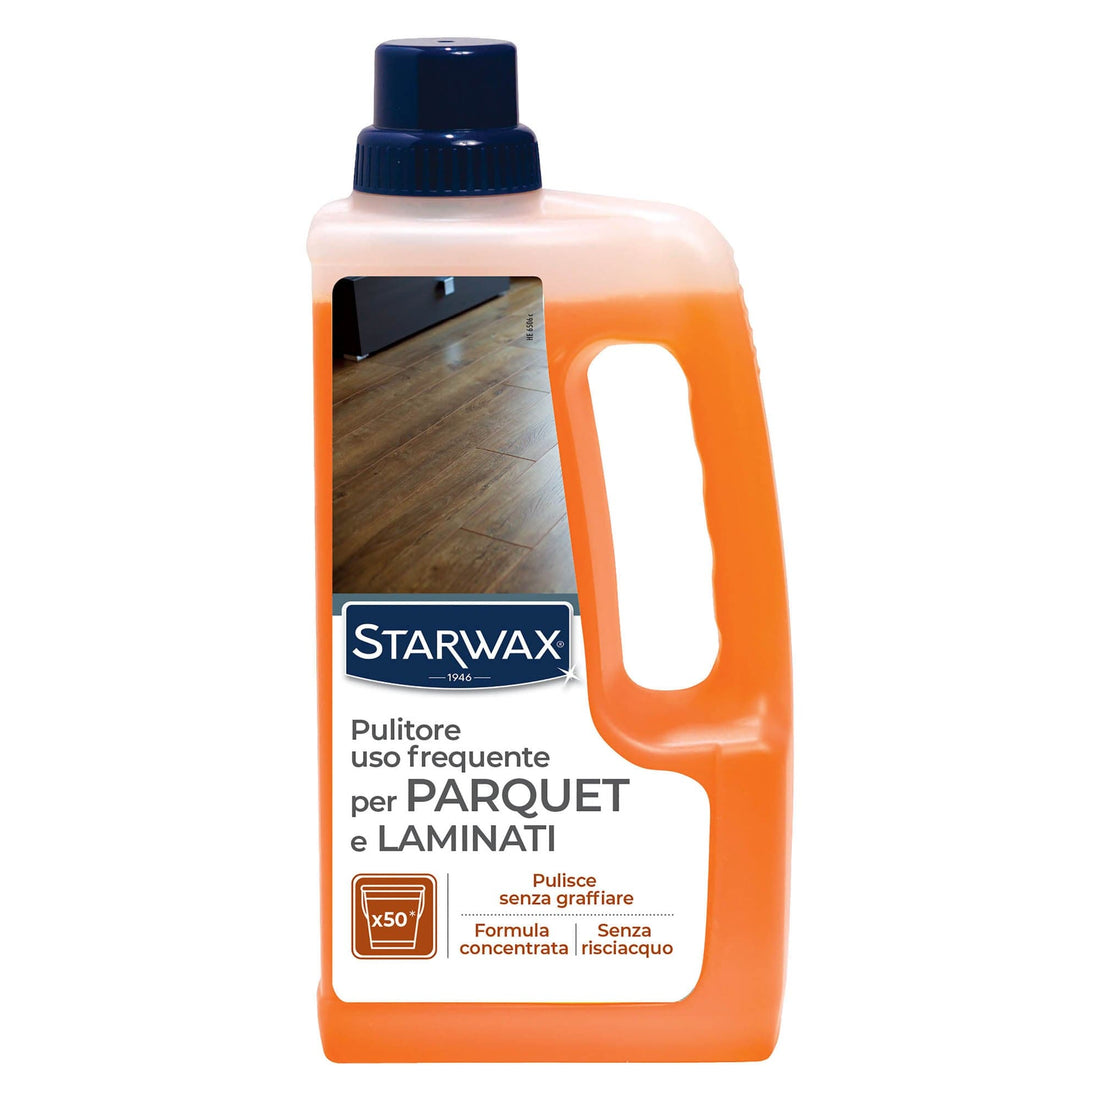 FREQUENT USE CLEANER FOR PARQUET AND LAMINATE FLOORS STARWAX 1LT - best price from Maltashopper.com BR470510111